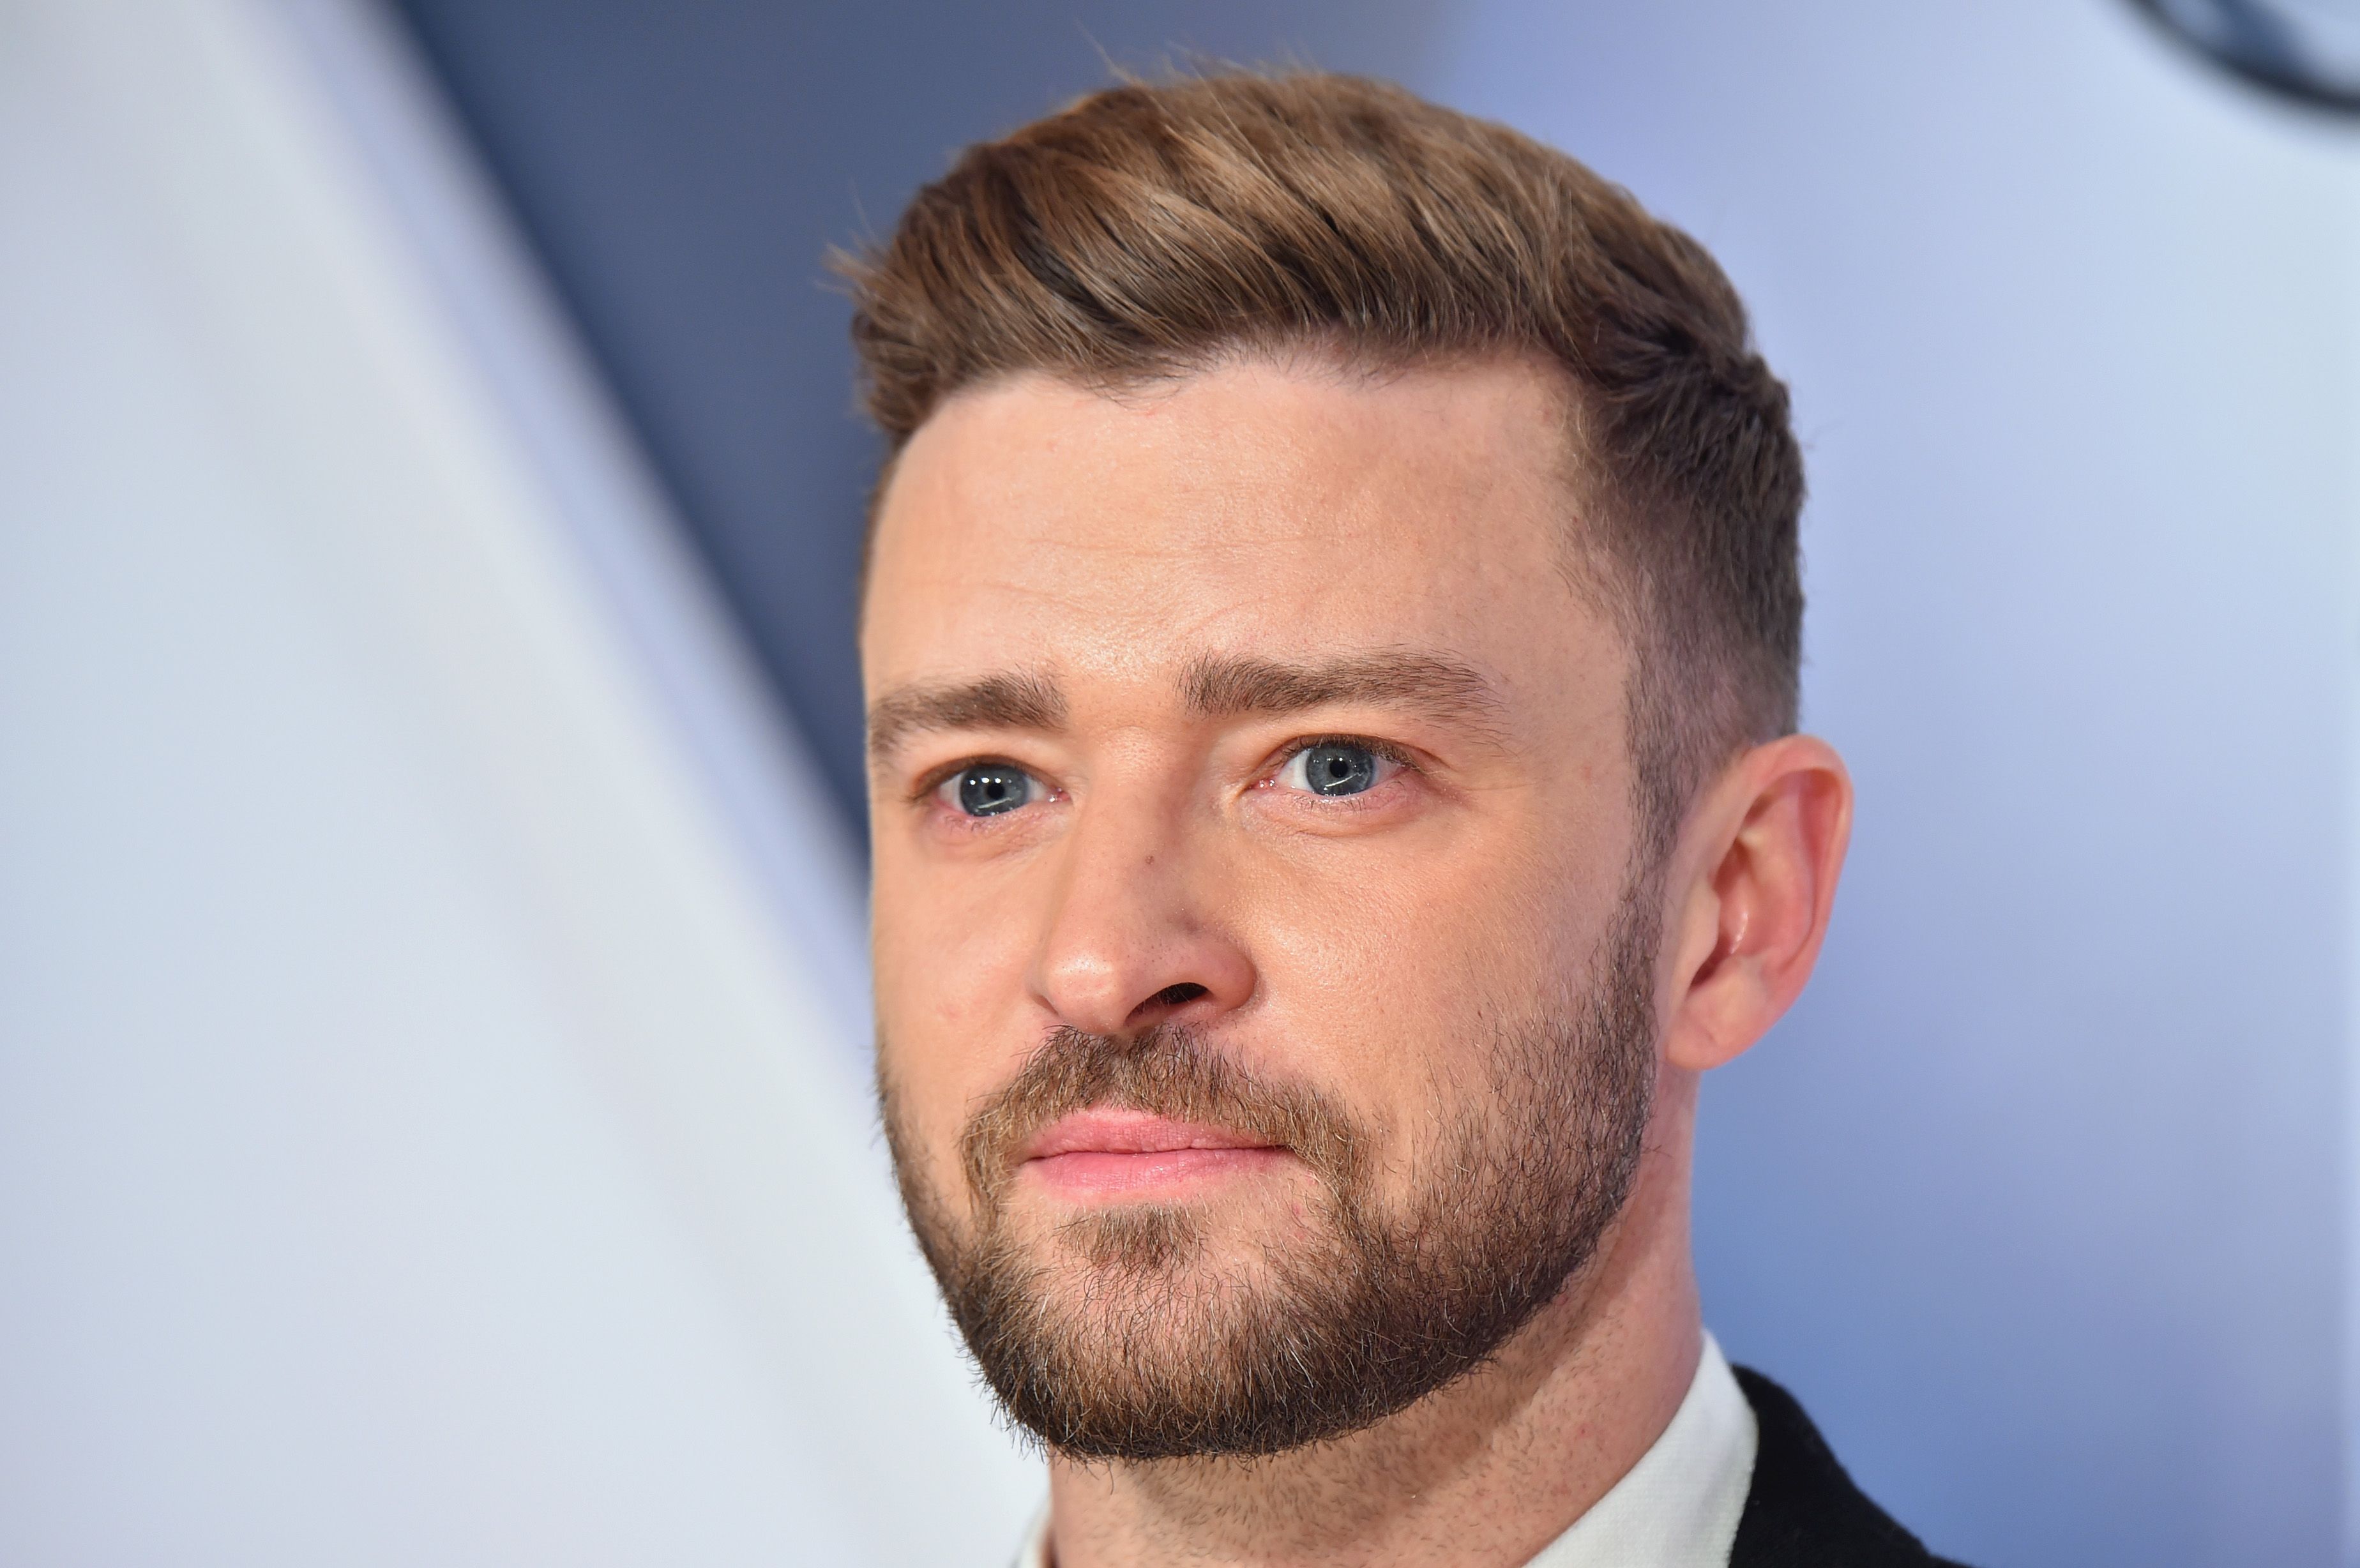 How many movies has Justin Timberlake been in?